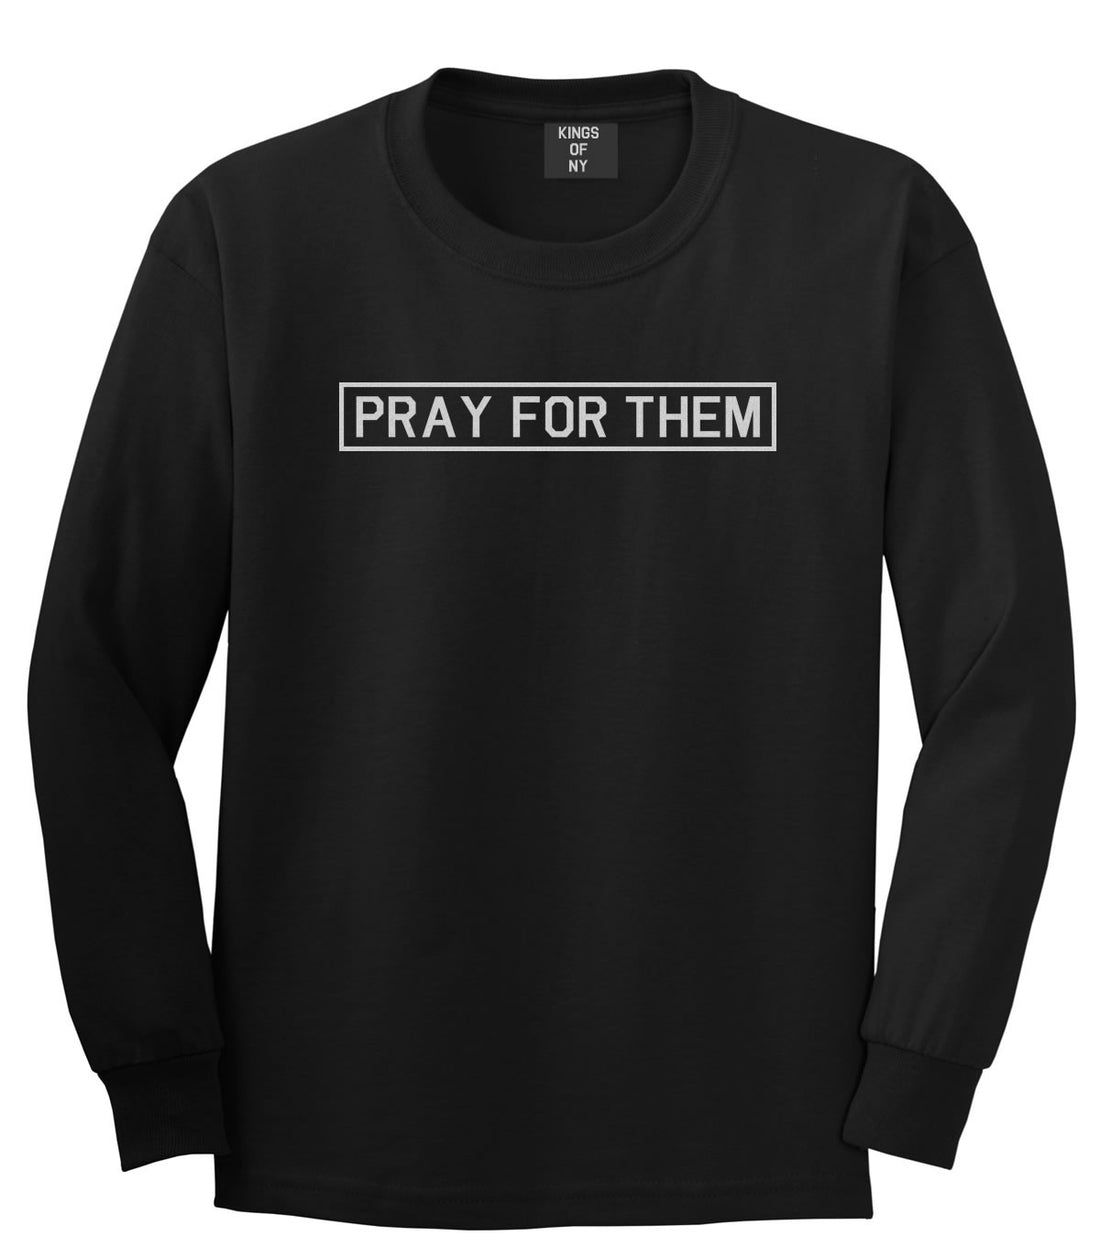 Pray For Them Fall15 Boys Kids Long Sleeve T-Shirt in Black by Kings Of NY